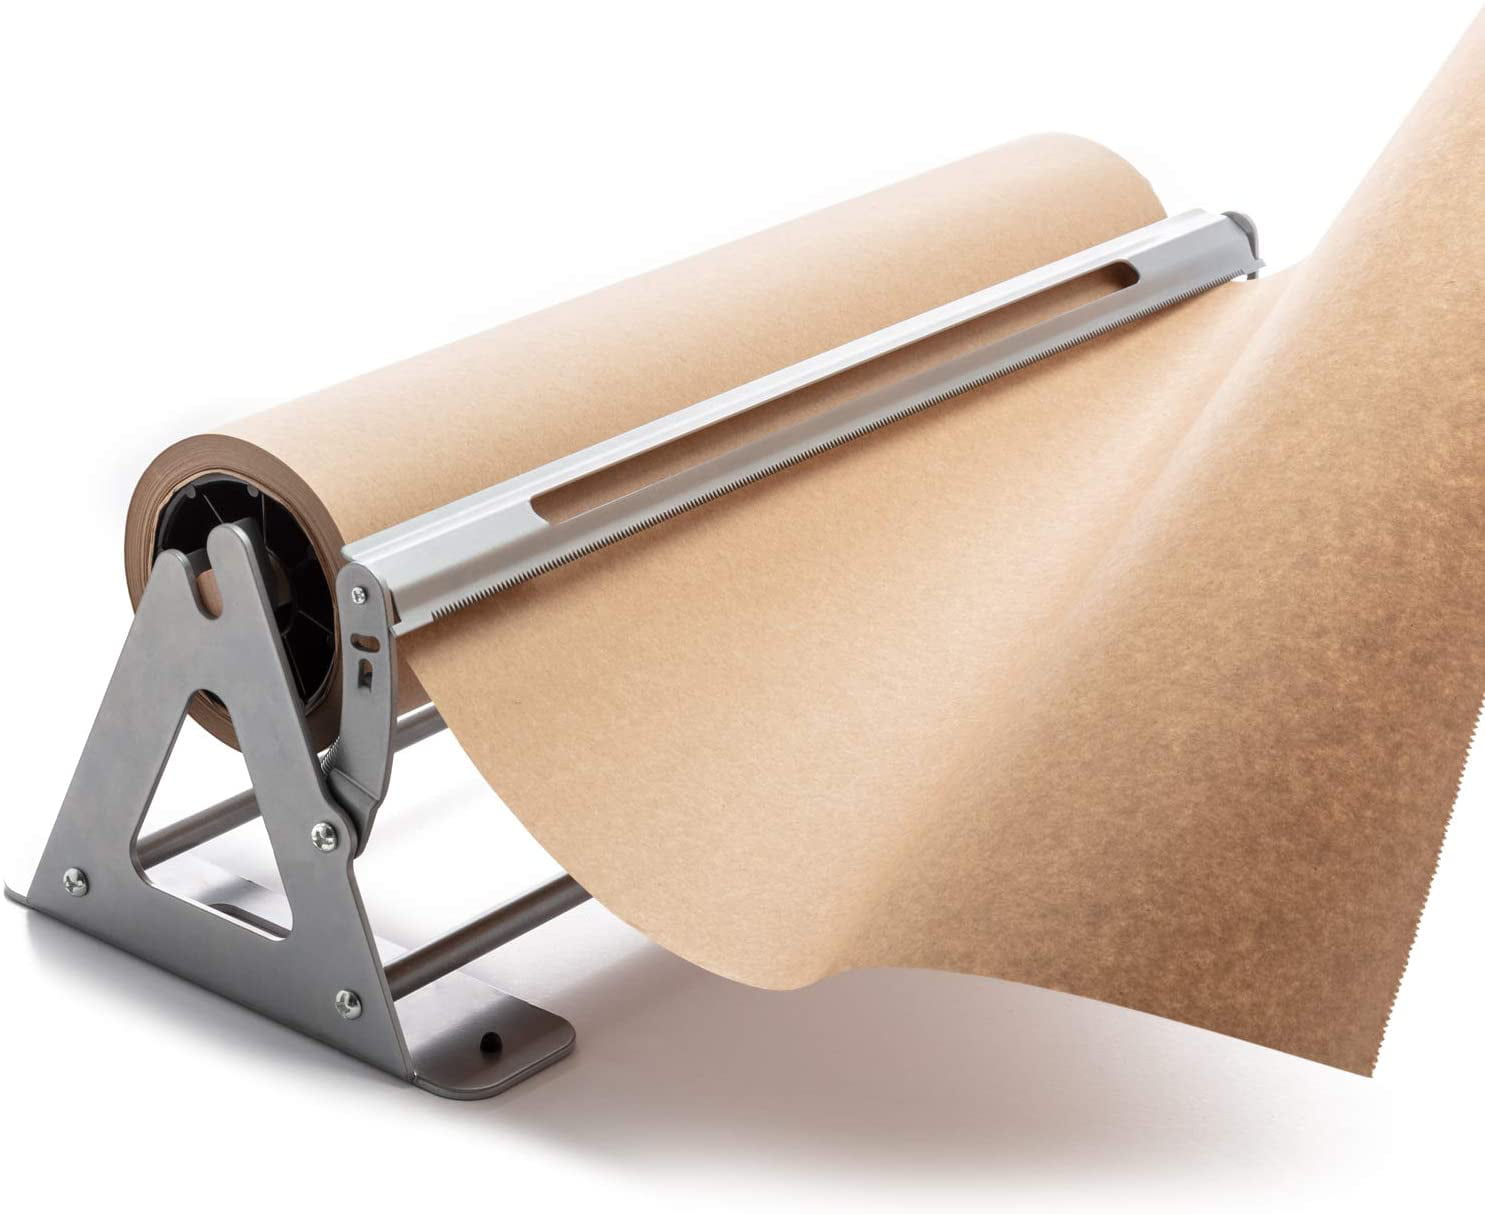 Kenley Butcher Paper Dispenser - Large Holder and Cutter for Wrapping  Butcher Craft Freezer Paper Roll 24 Inch - Wall Mount or Tabletop - Carbon  Steel